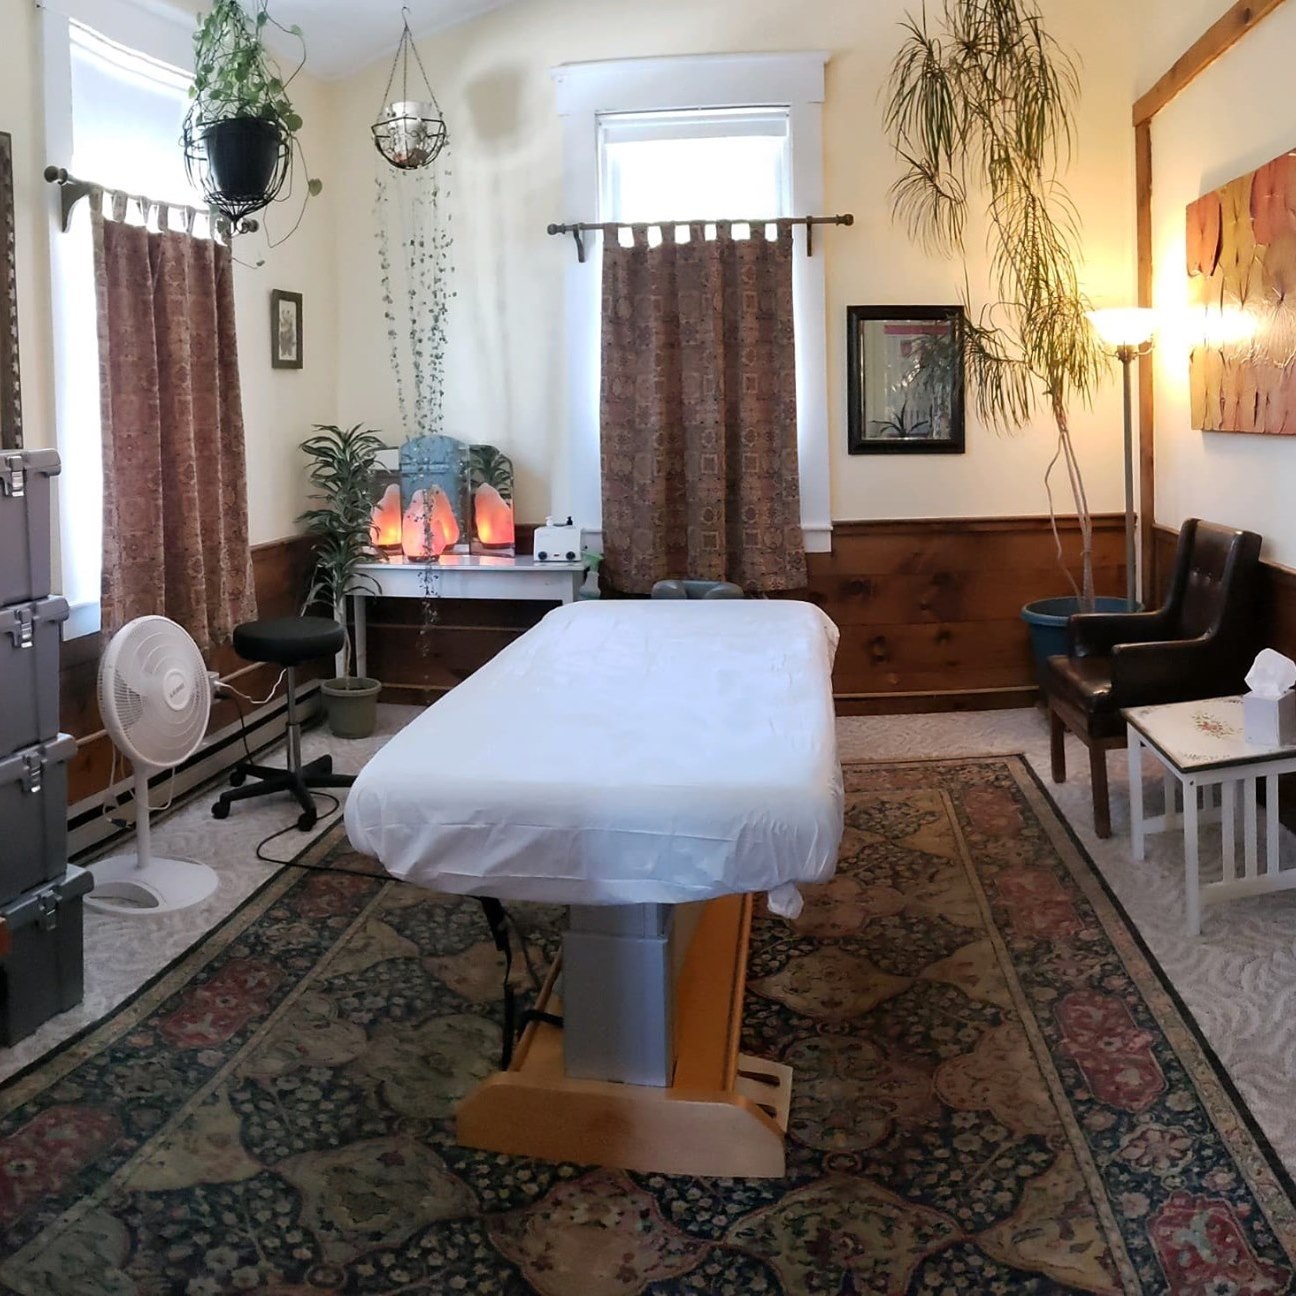 Massage Therapy by April Flaherty 18 Highland St, Townsend Massachusetts 01469